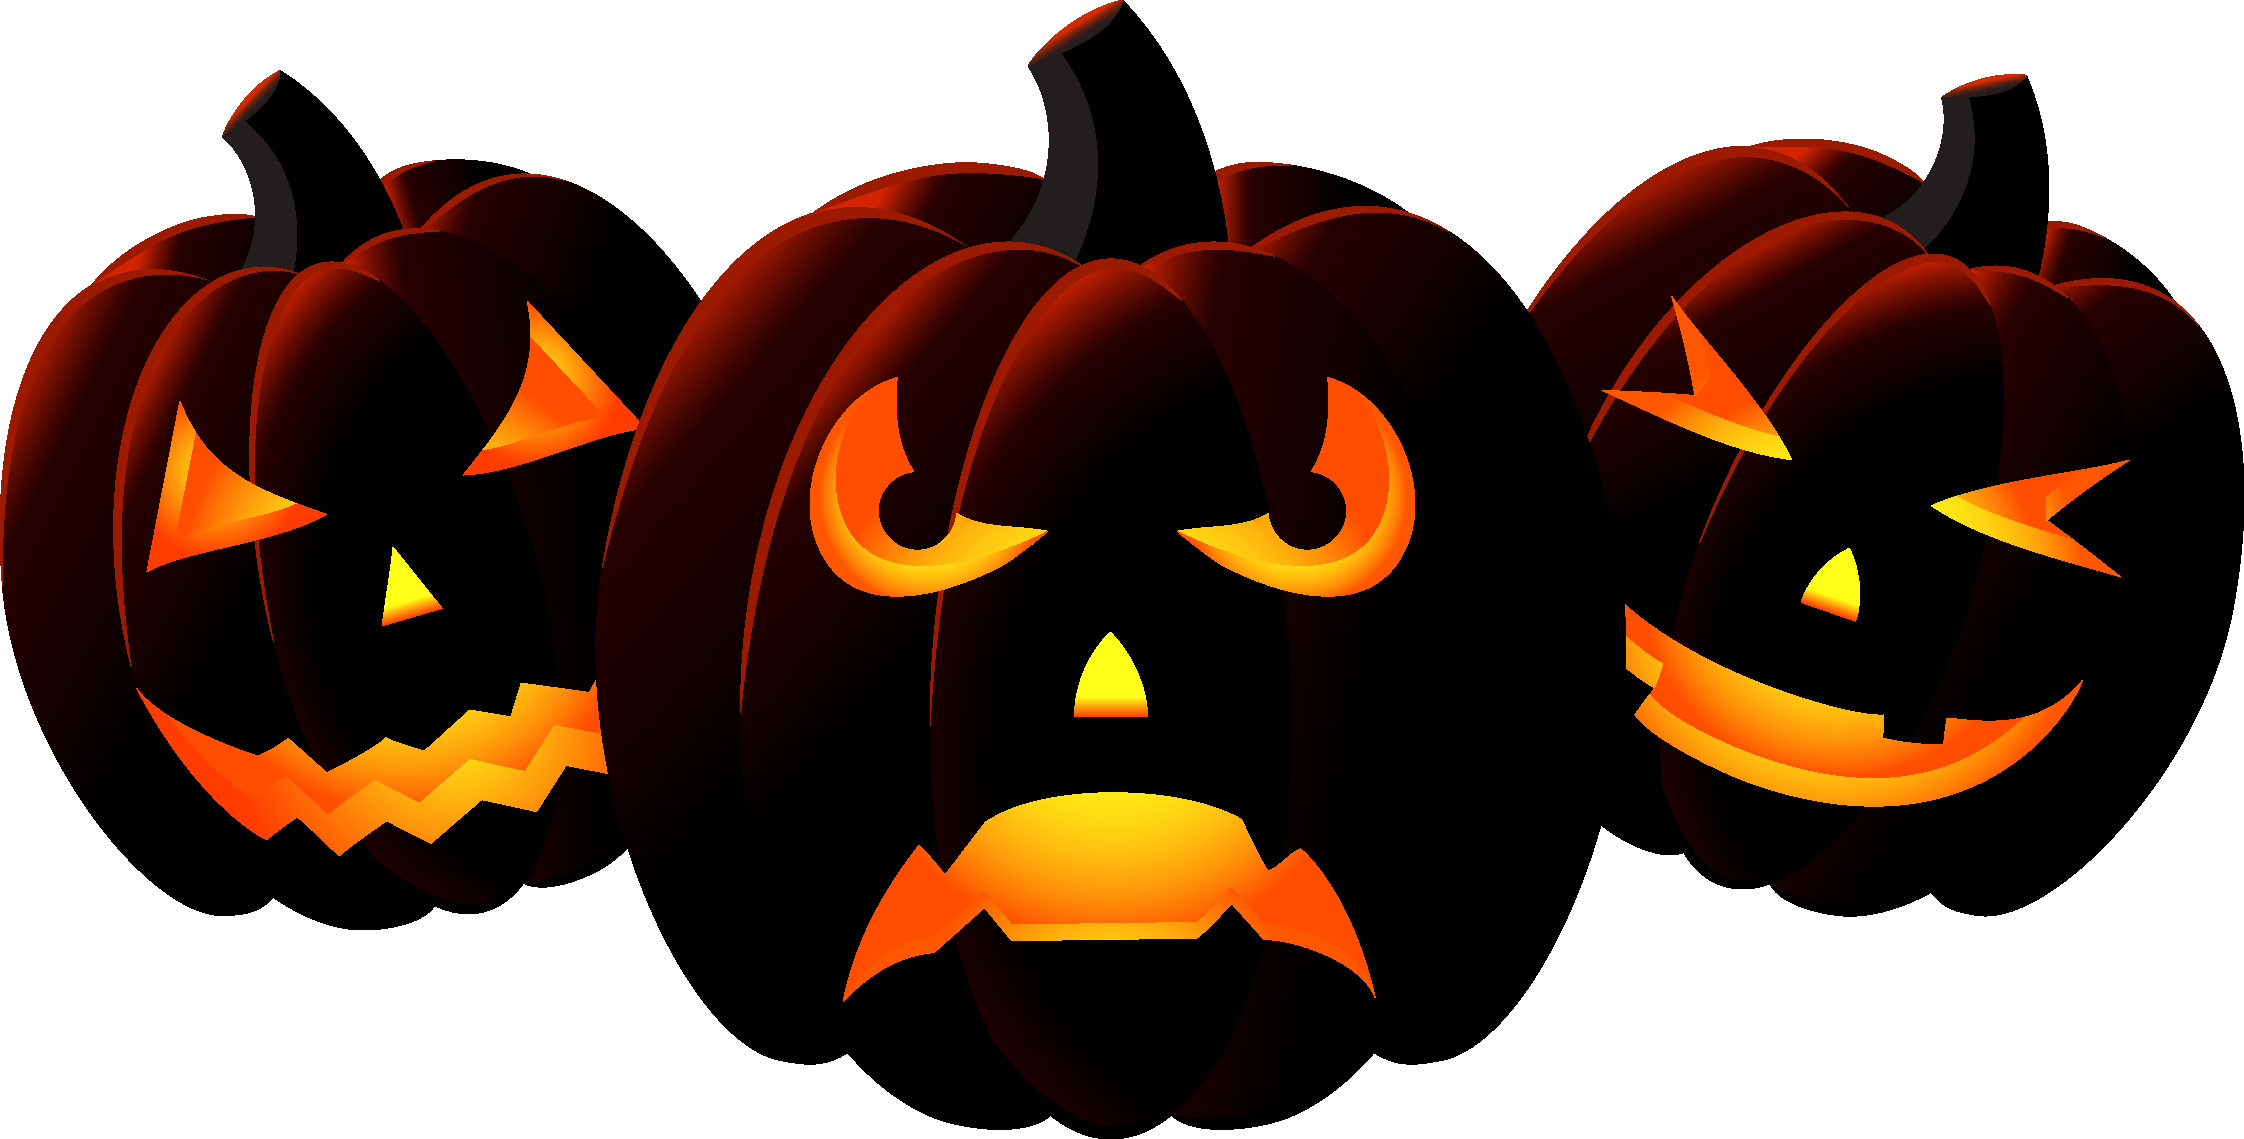 Scary Halloween Tens! Sounds Android Pumpkin PNG Image